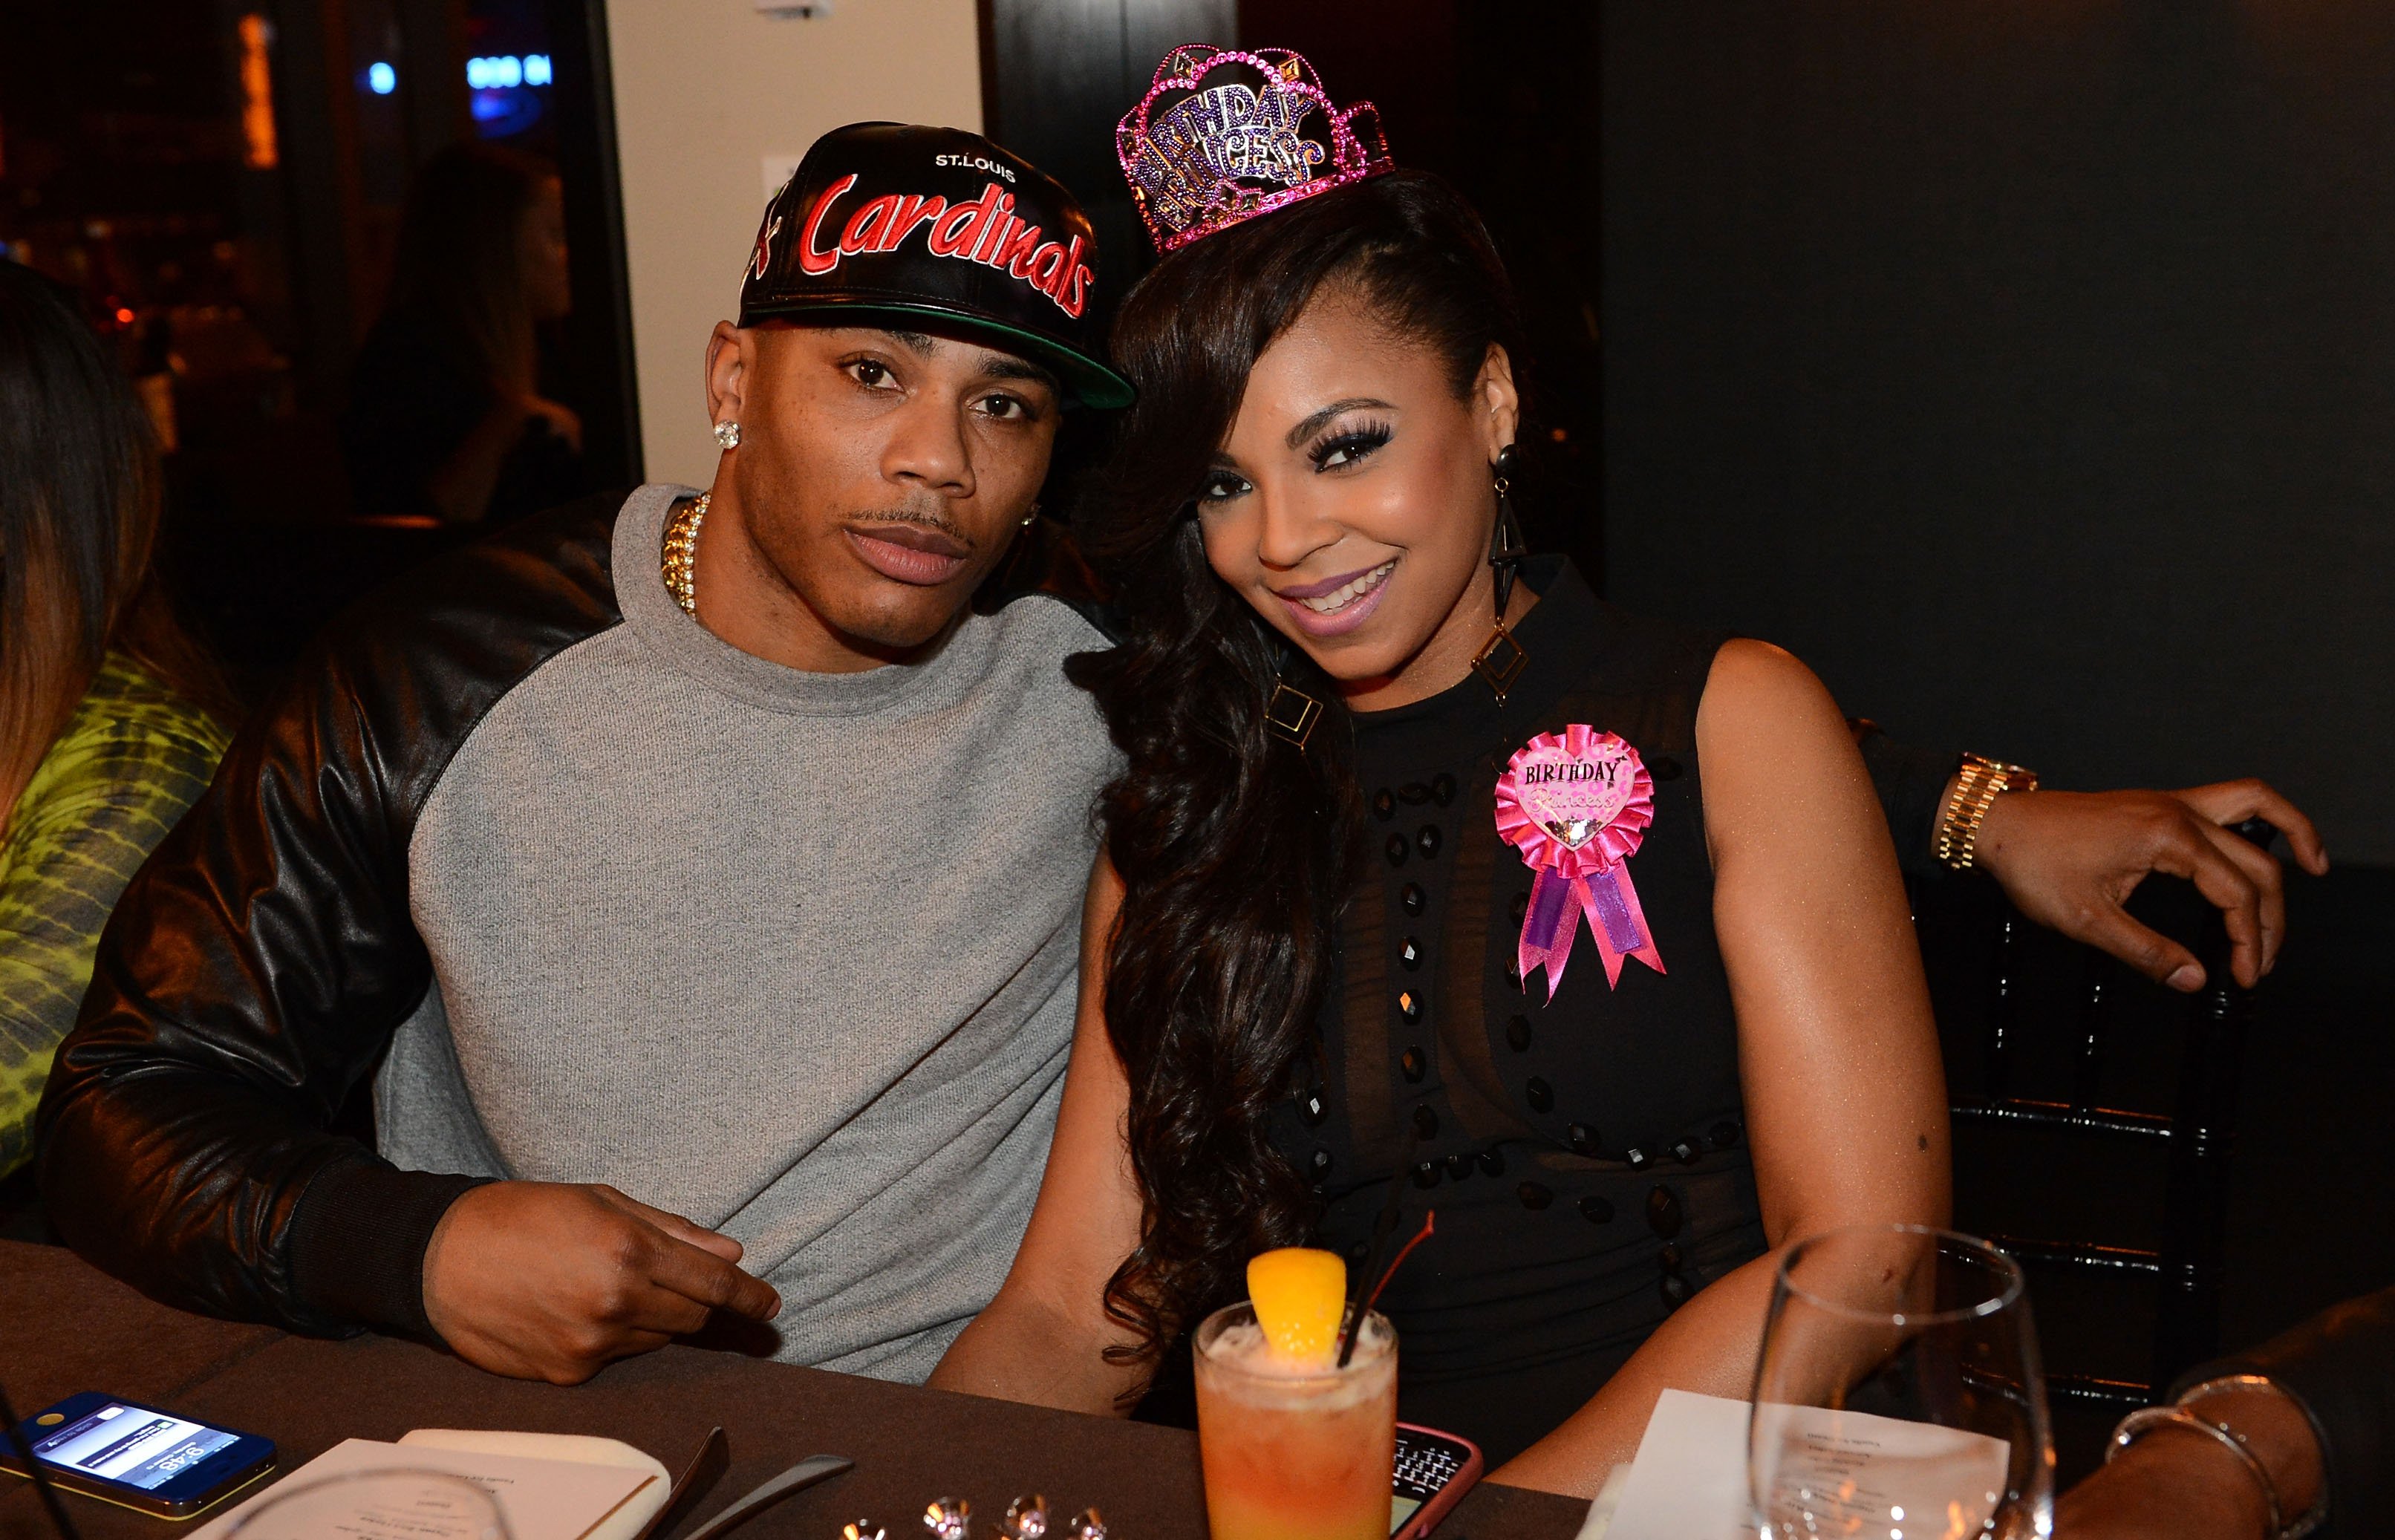 Nelly and ex, Ashanti during Ashanti's surprise birthday dinner on October 13, 2012 in Atlanta, Georgia | Photo: Getty Images